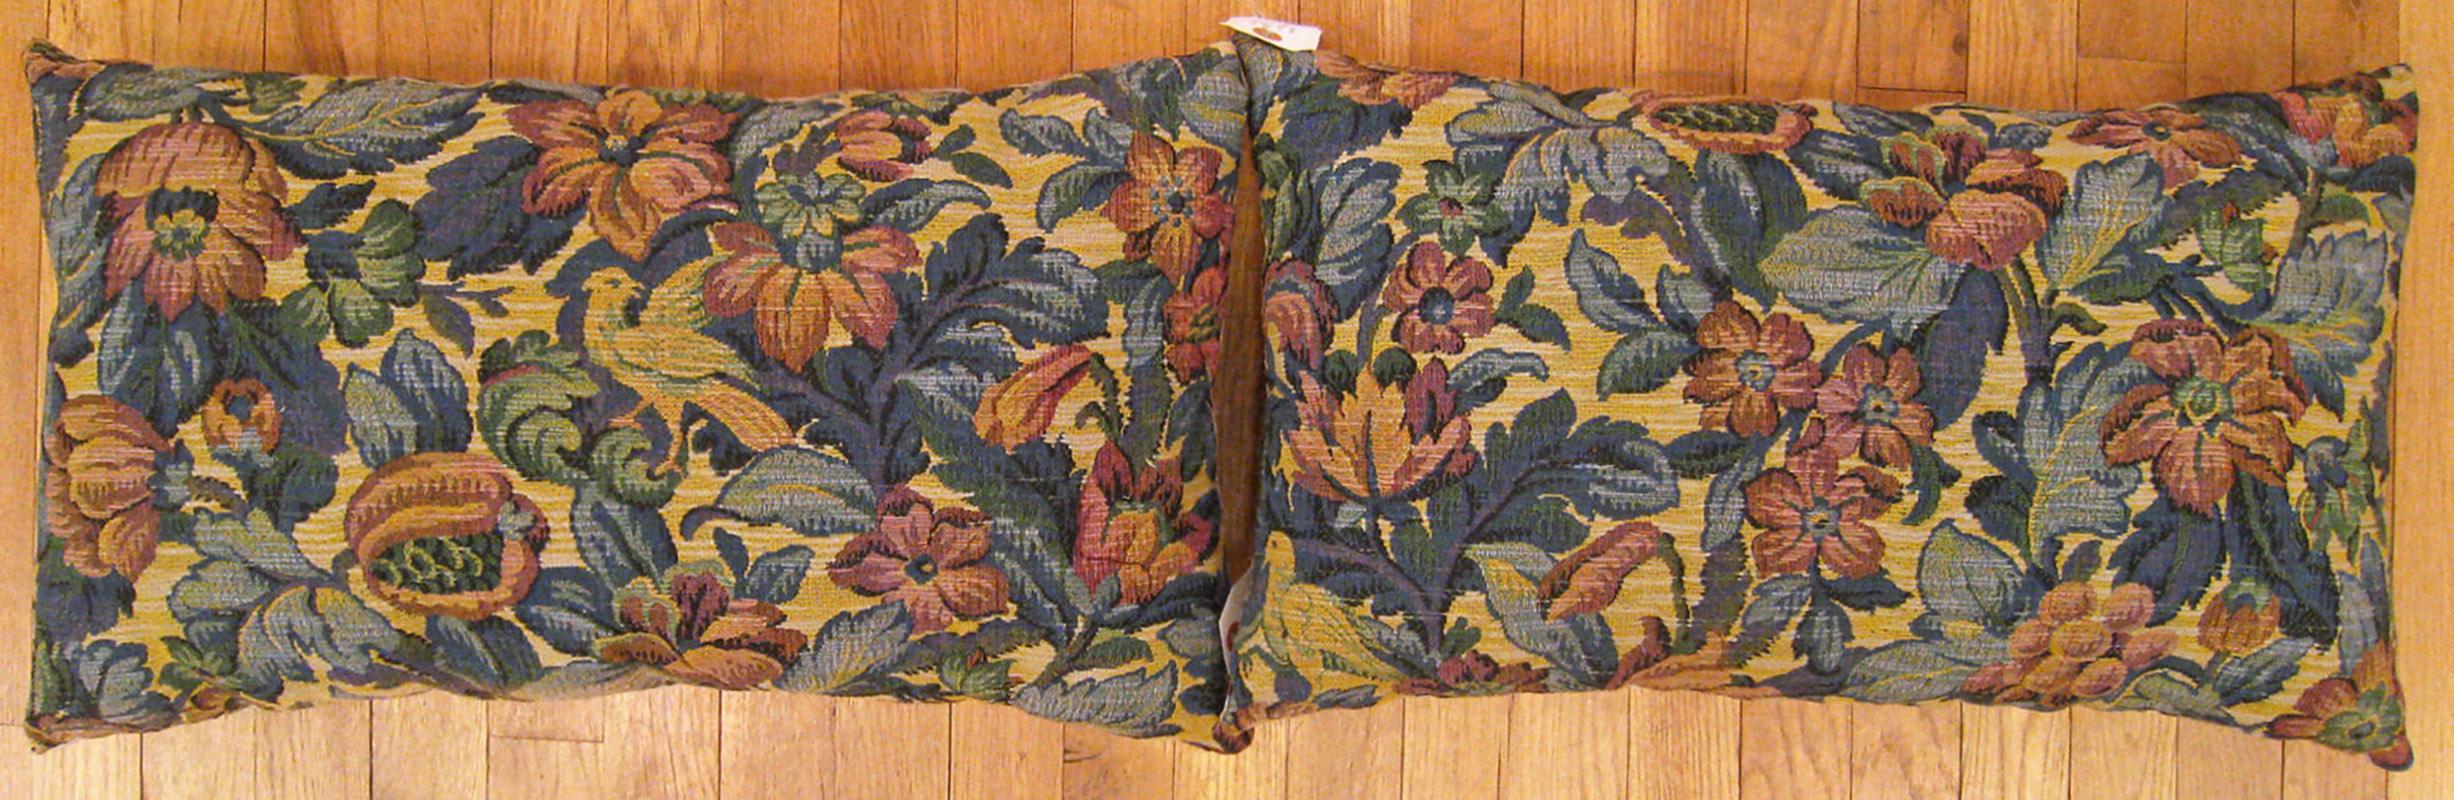 A pair of antique jacquard tapestry pillows ; size 1'2” x 2'0” each.

An antique decorative pillows with floral elements and birds allover a blue green central field, size 1'2